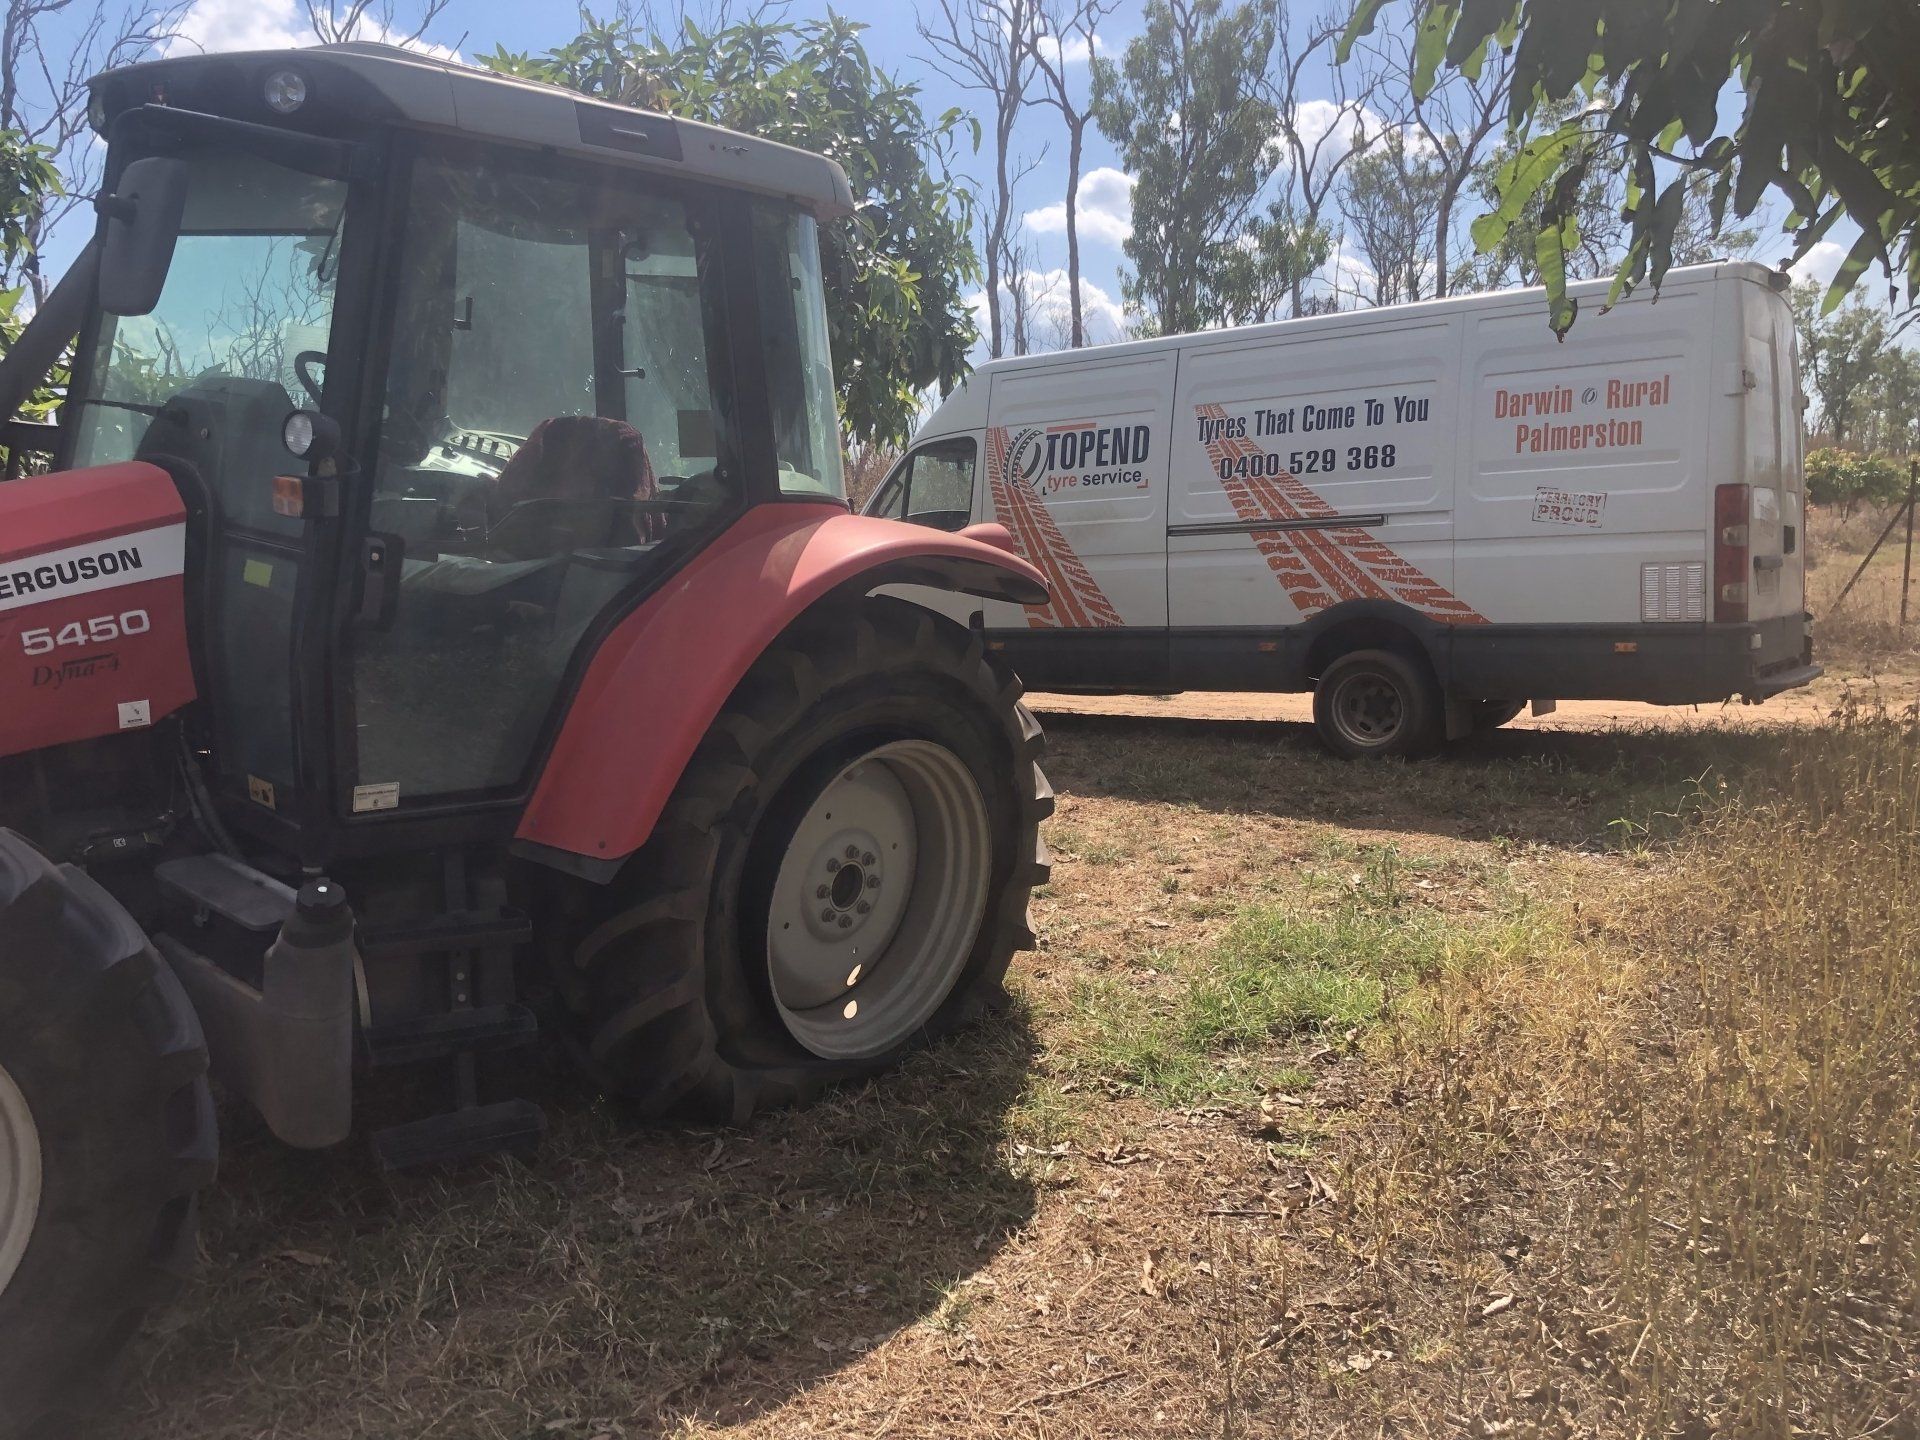 Flat Tyre of Tractor — Mobile Tyre Service in Darwin, NT